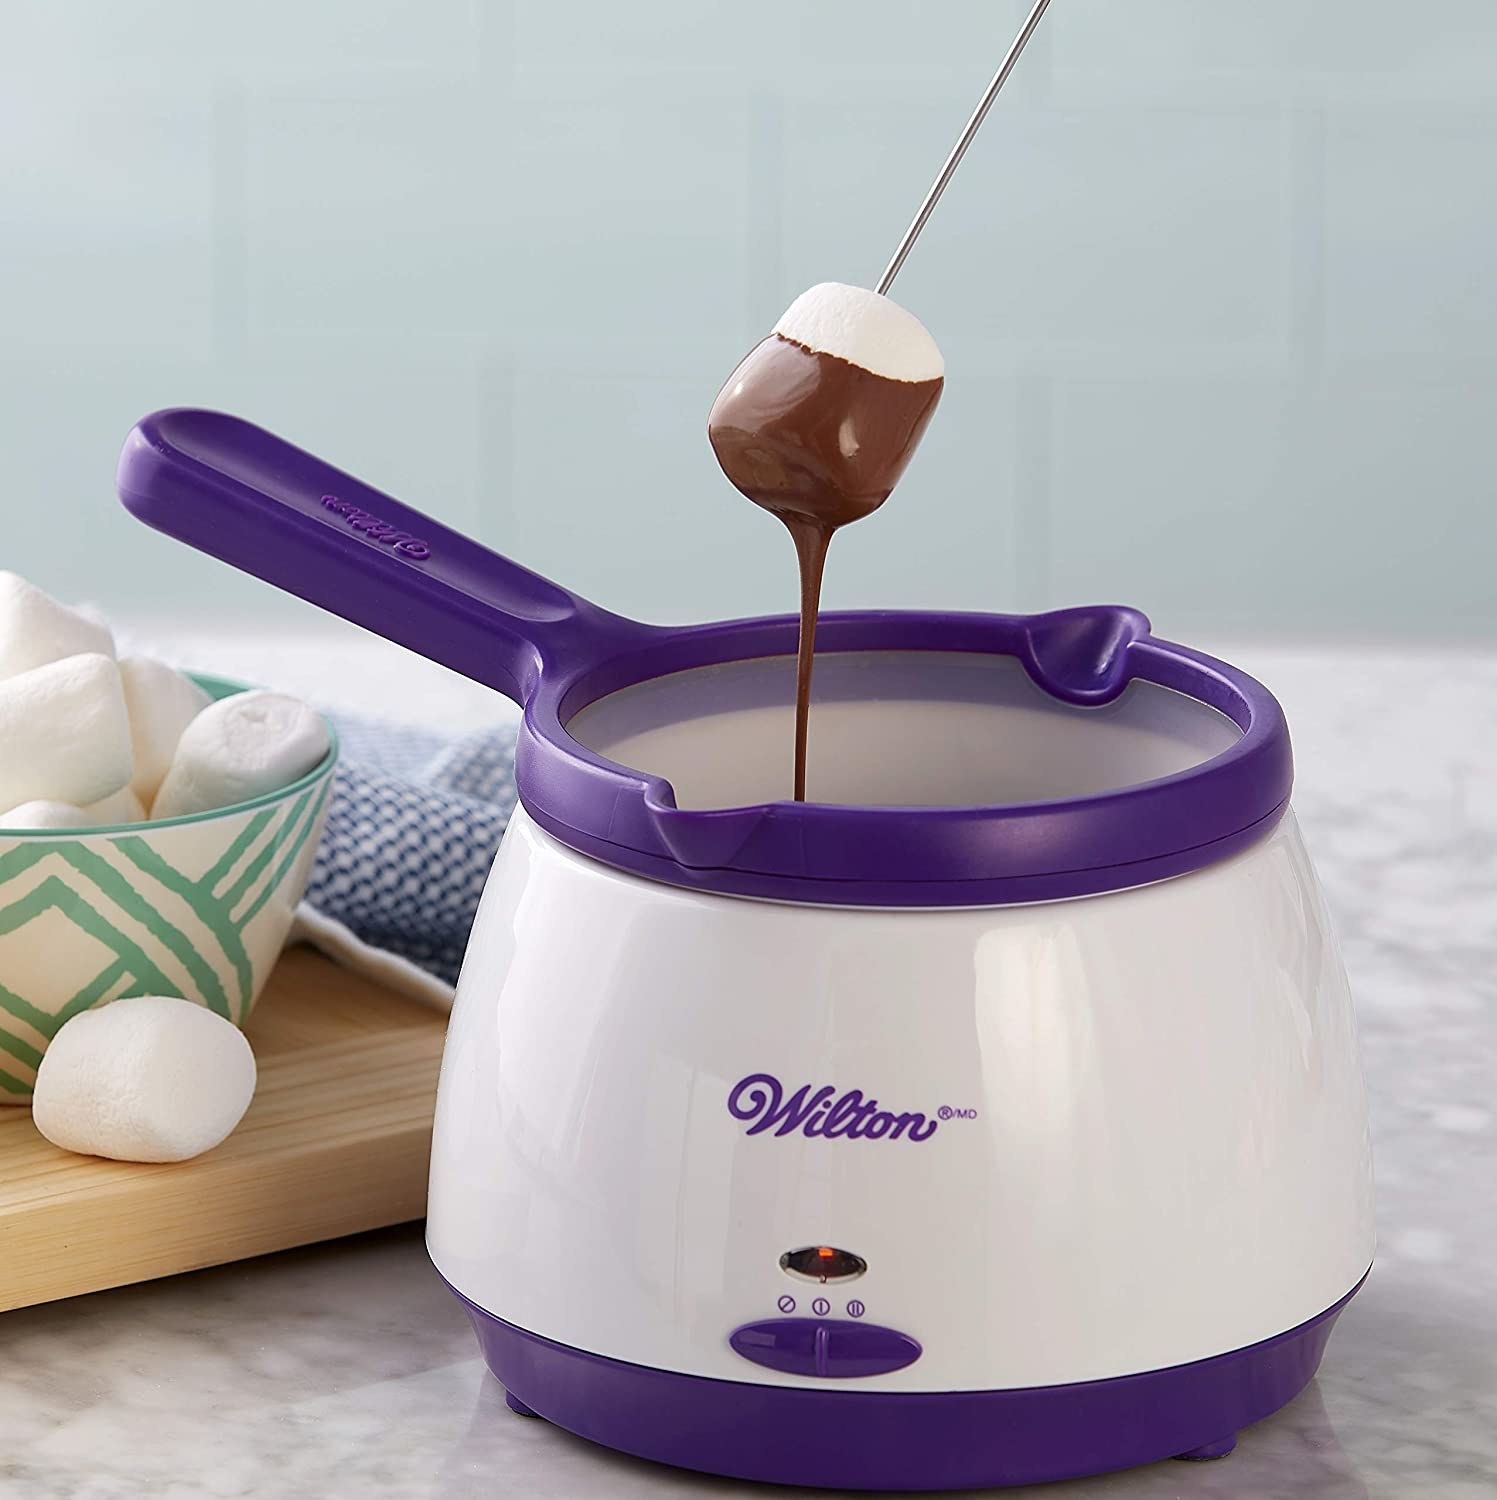 A person dipping a marshmallow into the pot filled with chocolate